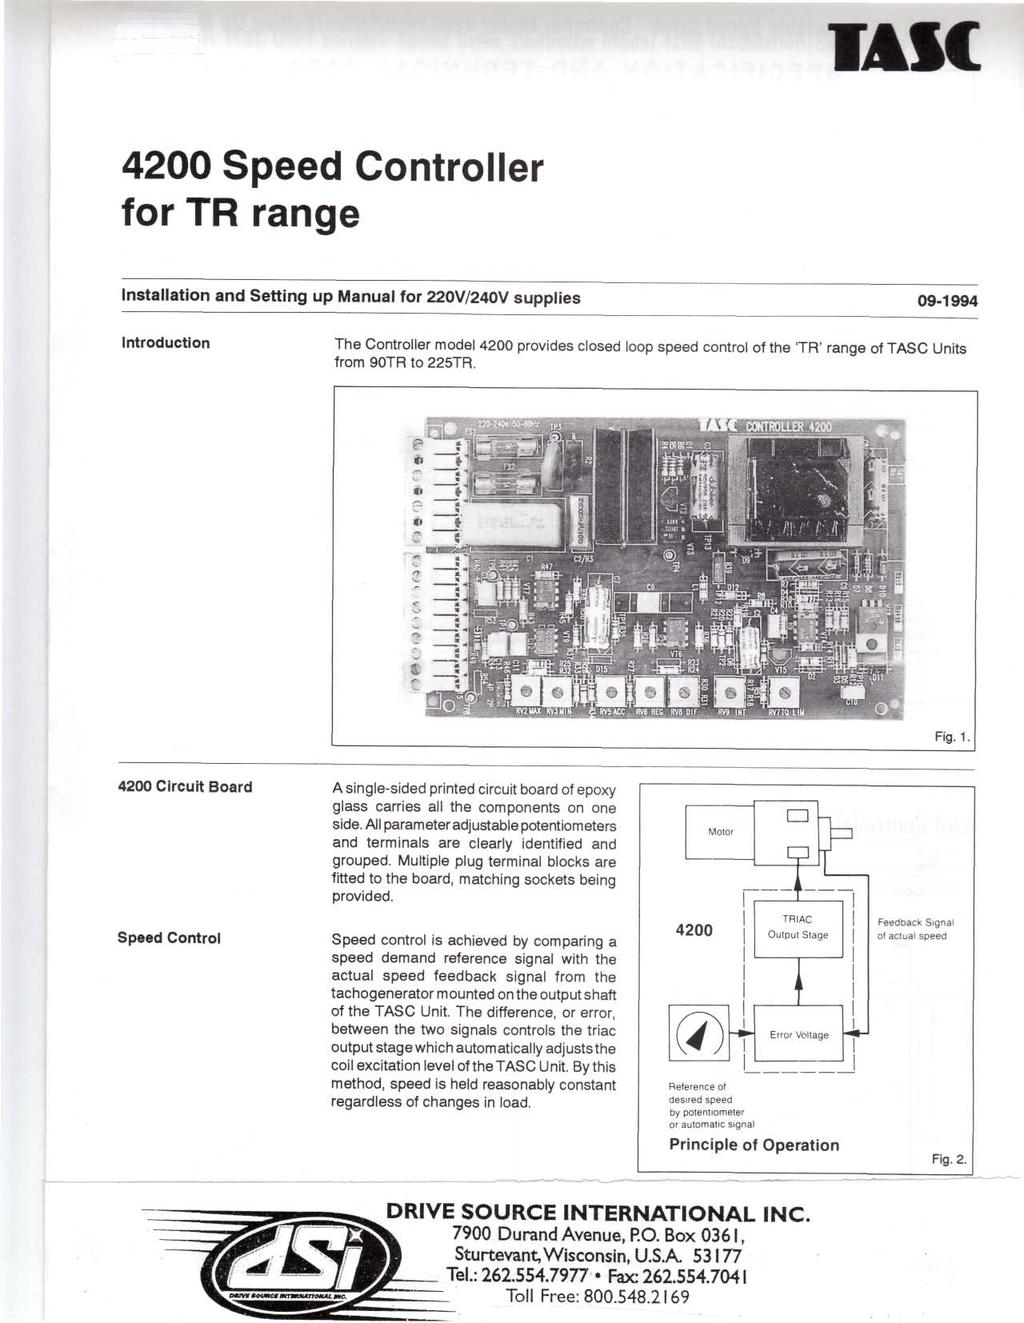 TAfC 4200 Speed Controller for TR range Installation and Setting up Manual for 220V/240V supplies 09-1994 Introduction The Controller model 4200 provides closed loop speed control of the TR' range of